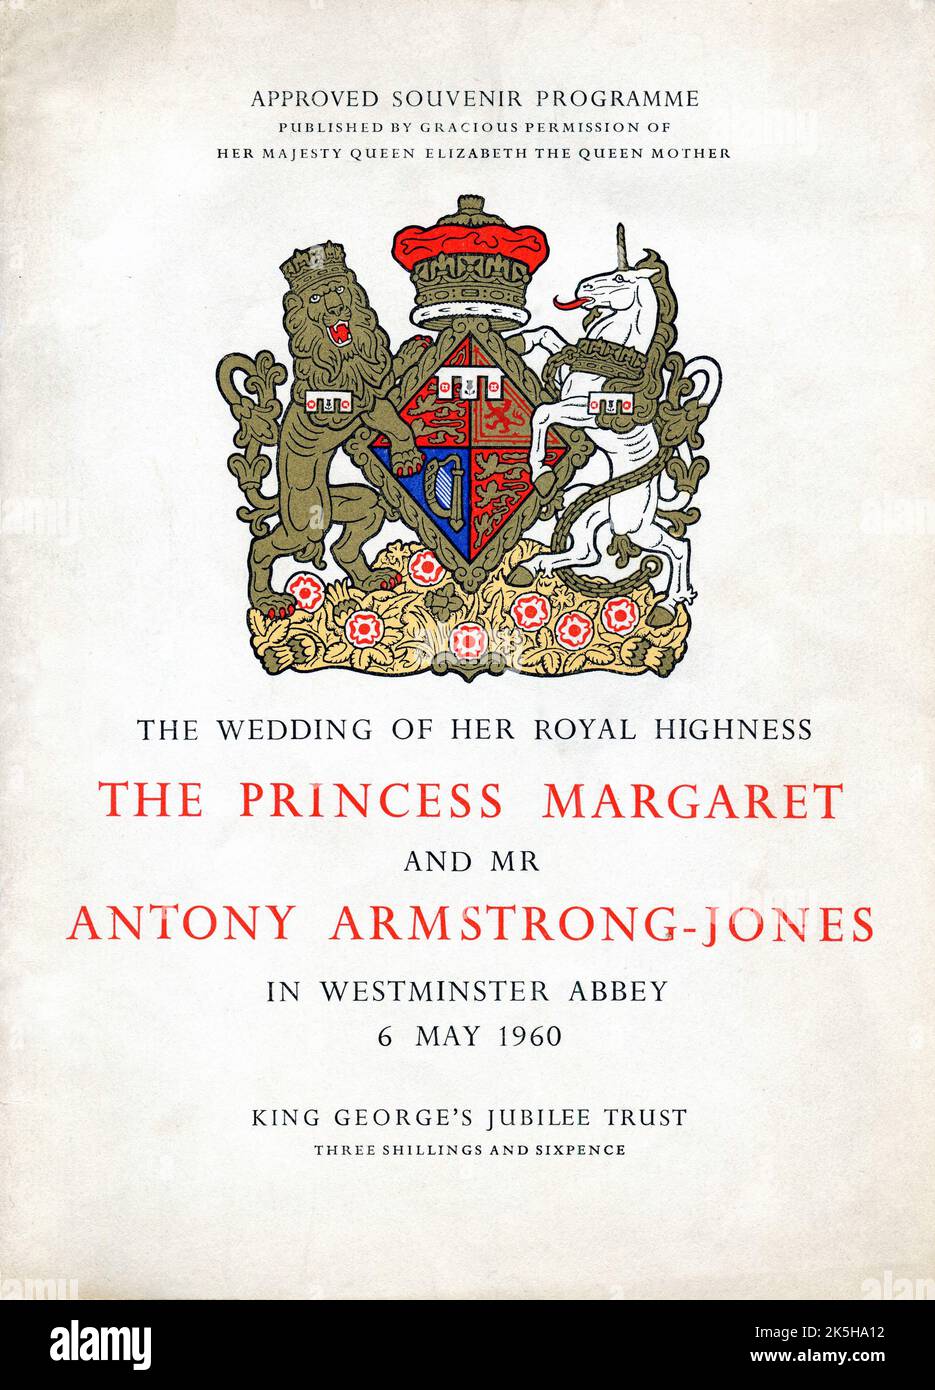 The front cover of the approved souvenir programme of ‘The Wedding of Her Royal Highness The Princess Margaret and Mr Antony Armstong-Jones in Westminster Abbey, 6 May 1960”. Stock Photo